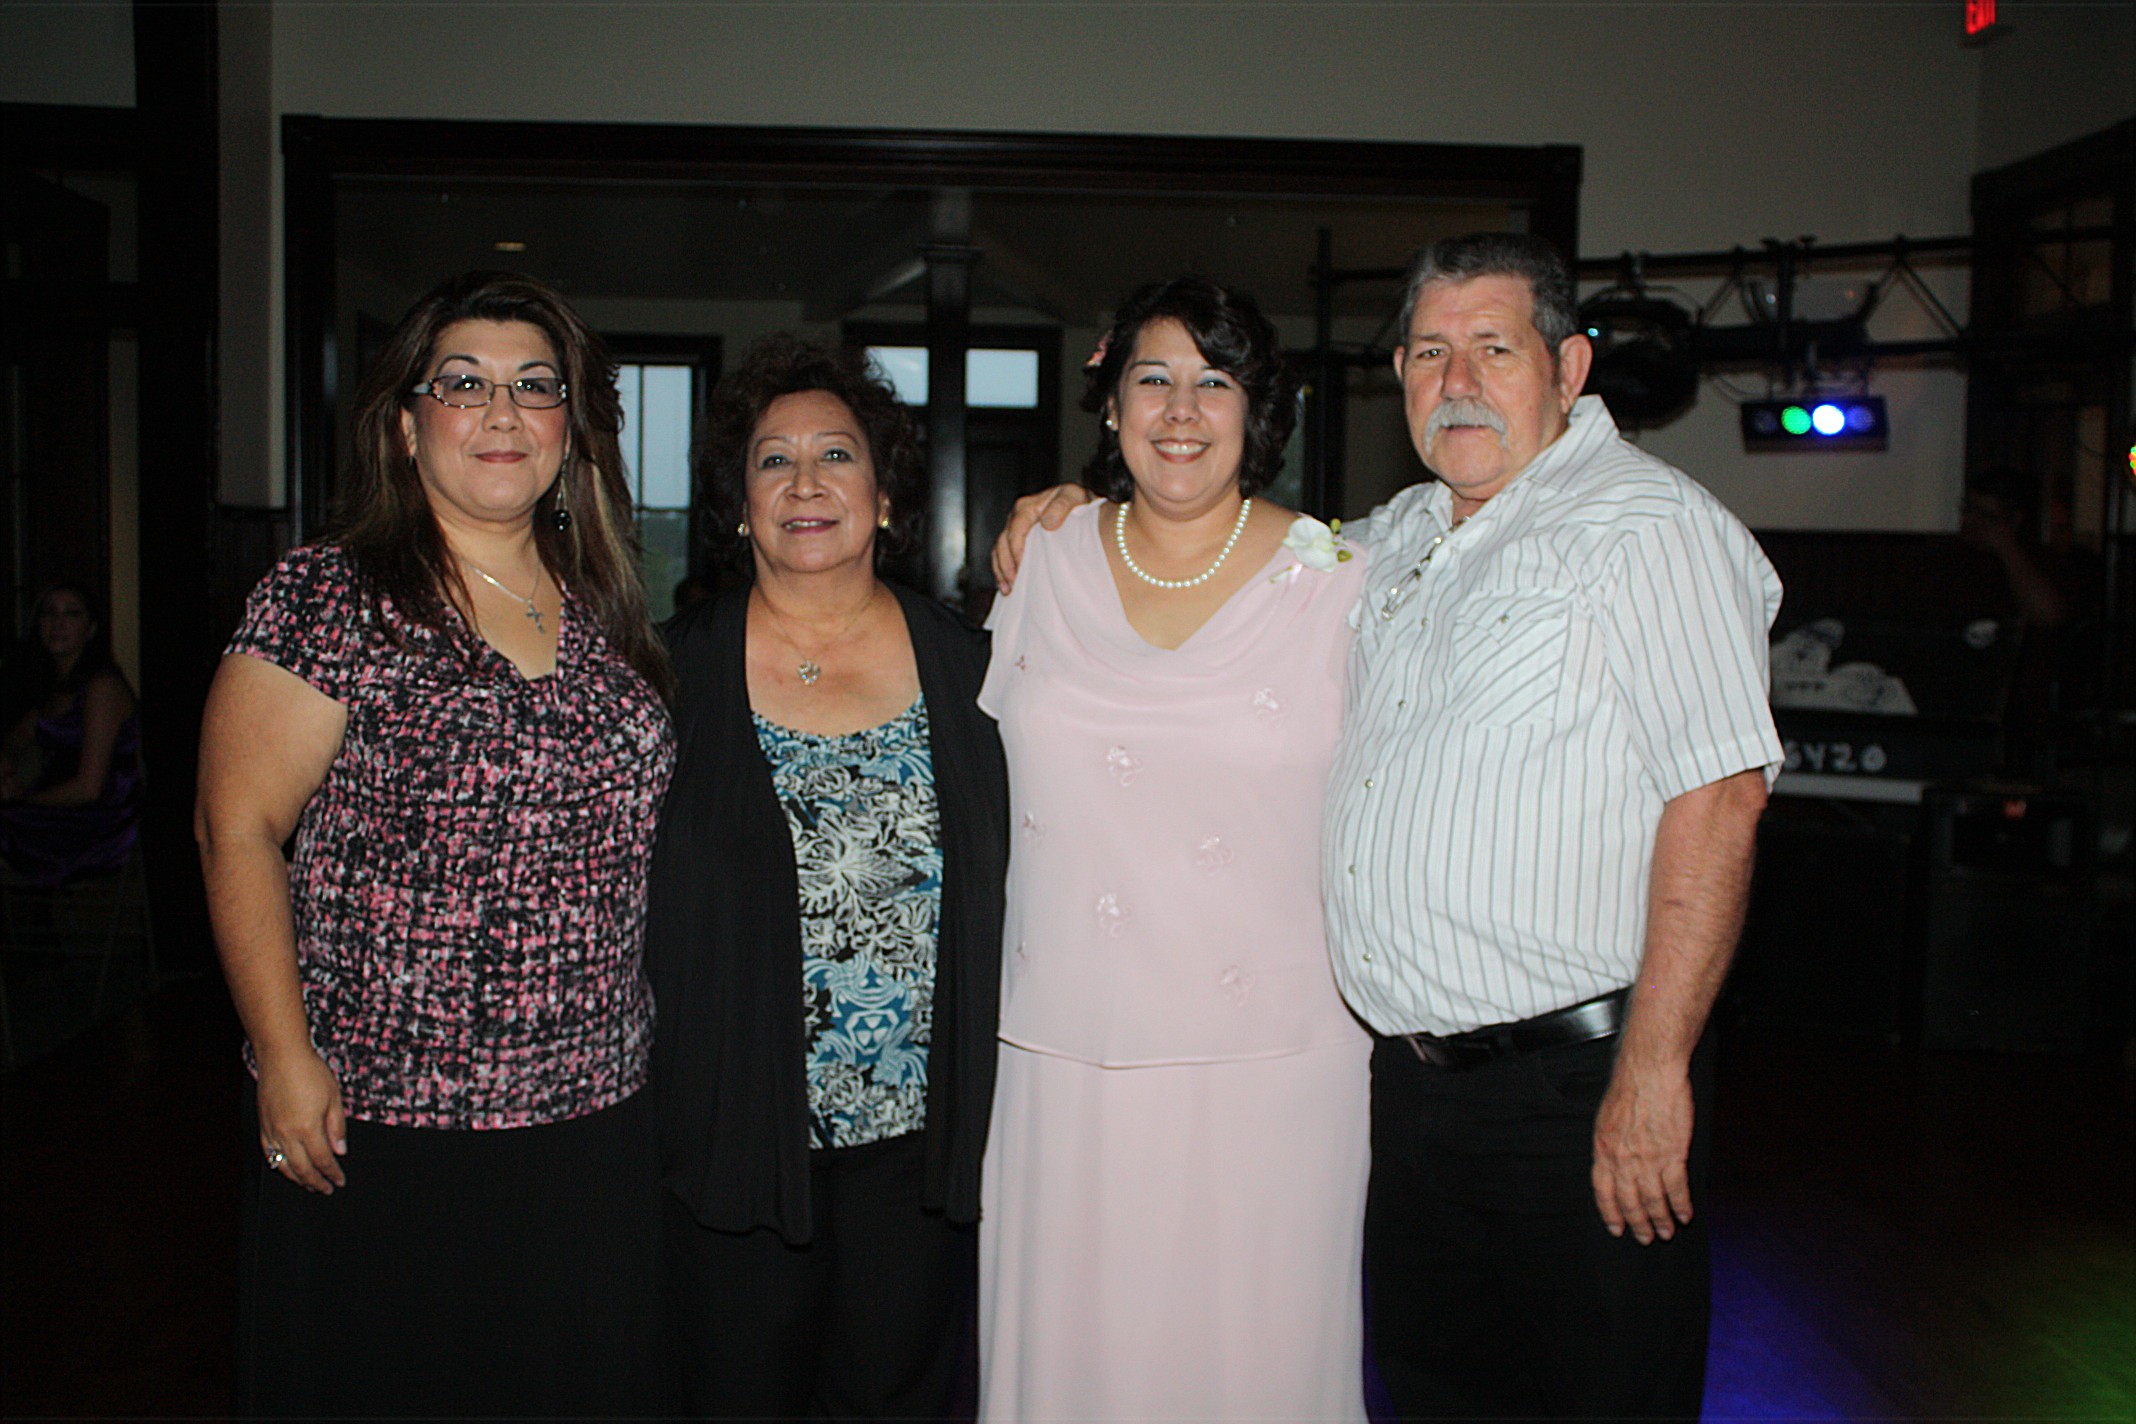 Left to Right-Betty, Maria, Antoinetta, and Frank at a Wedding of Frank and Maria's Granddaughter